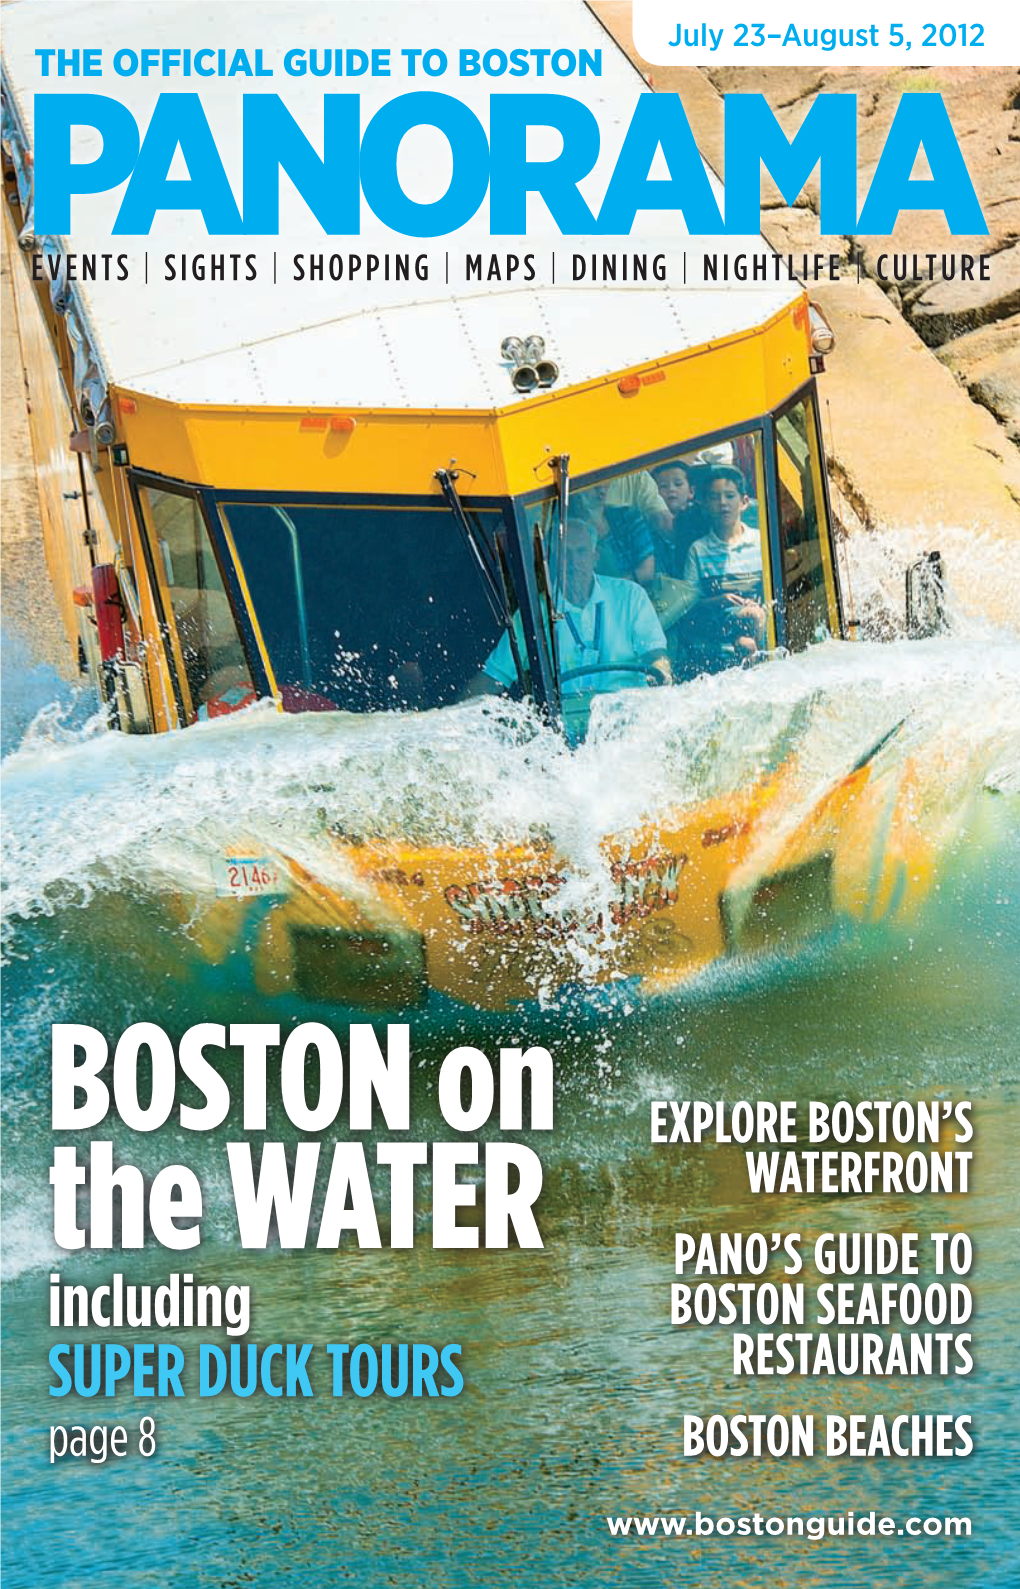 Boston on the Water W Ith Boston’S Seaside Locale and an Increasingly Hot Summer, There’S Never Been a Better Time for Getting Active on the Water